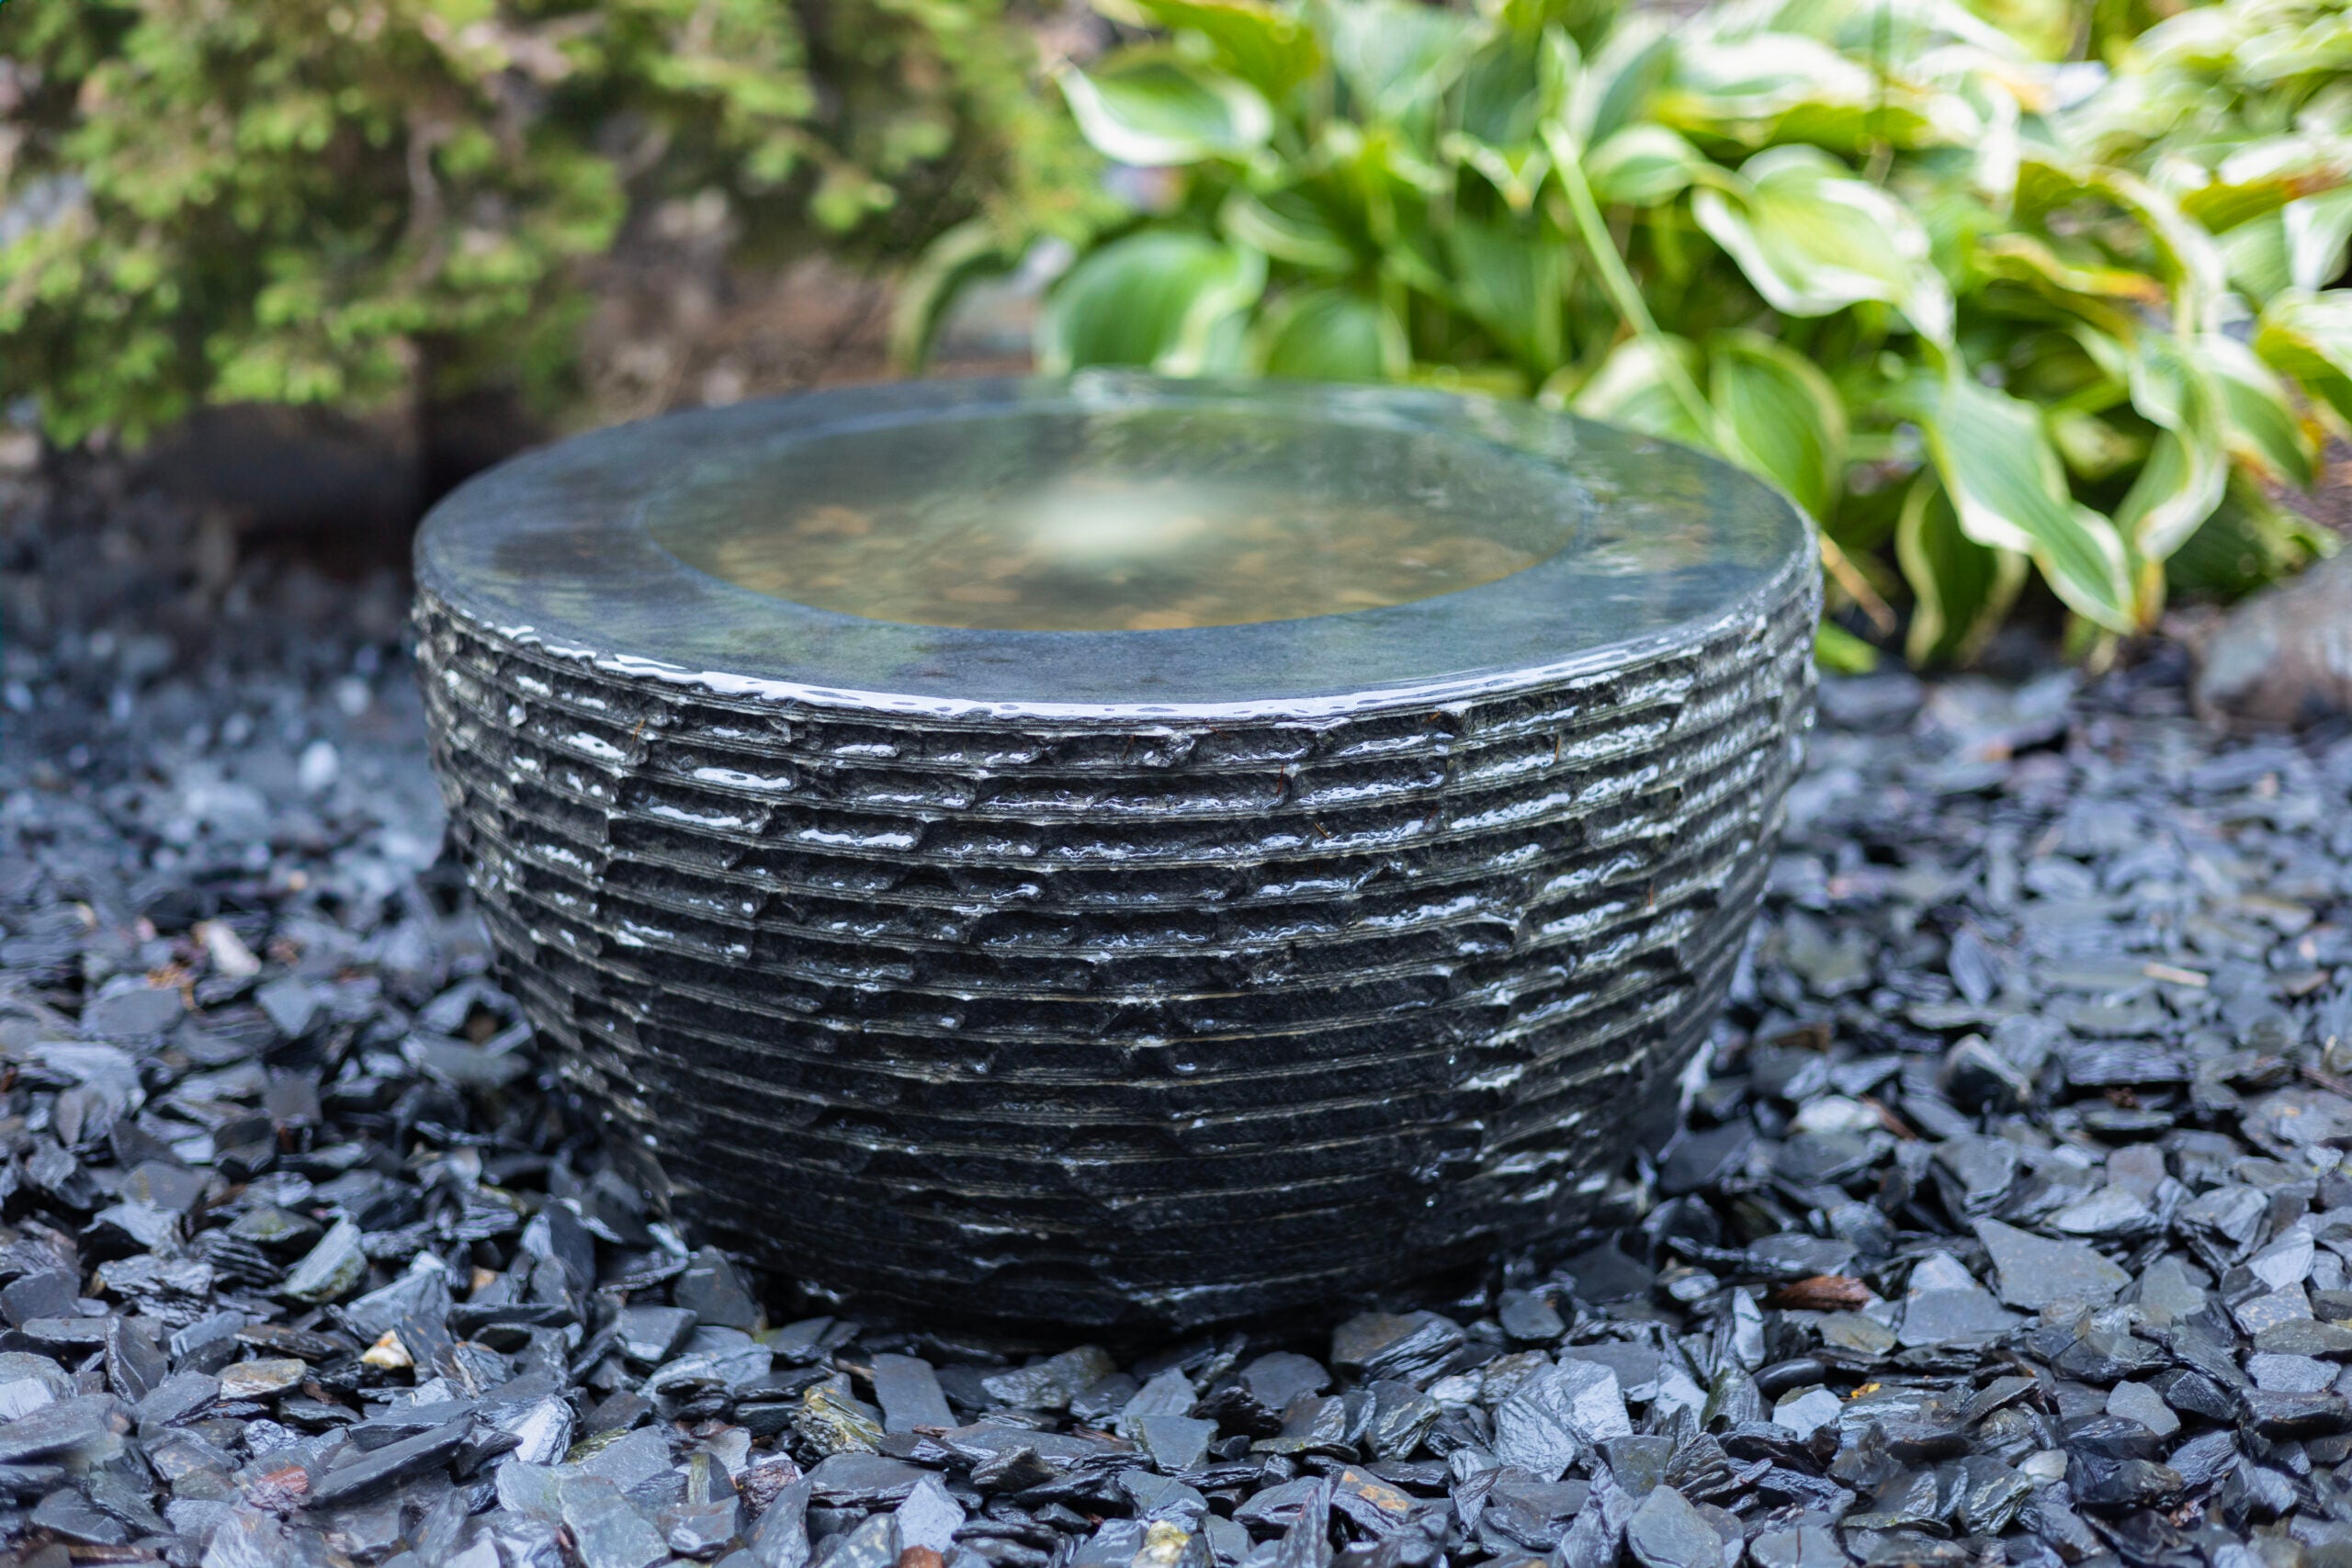 Tranquil Décor Infinity Bowl Fountain – 24″ - American Pond Supplies American Pond Supplies